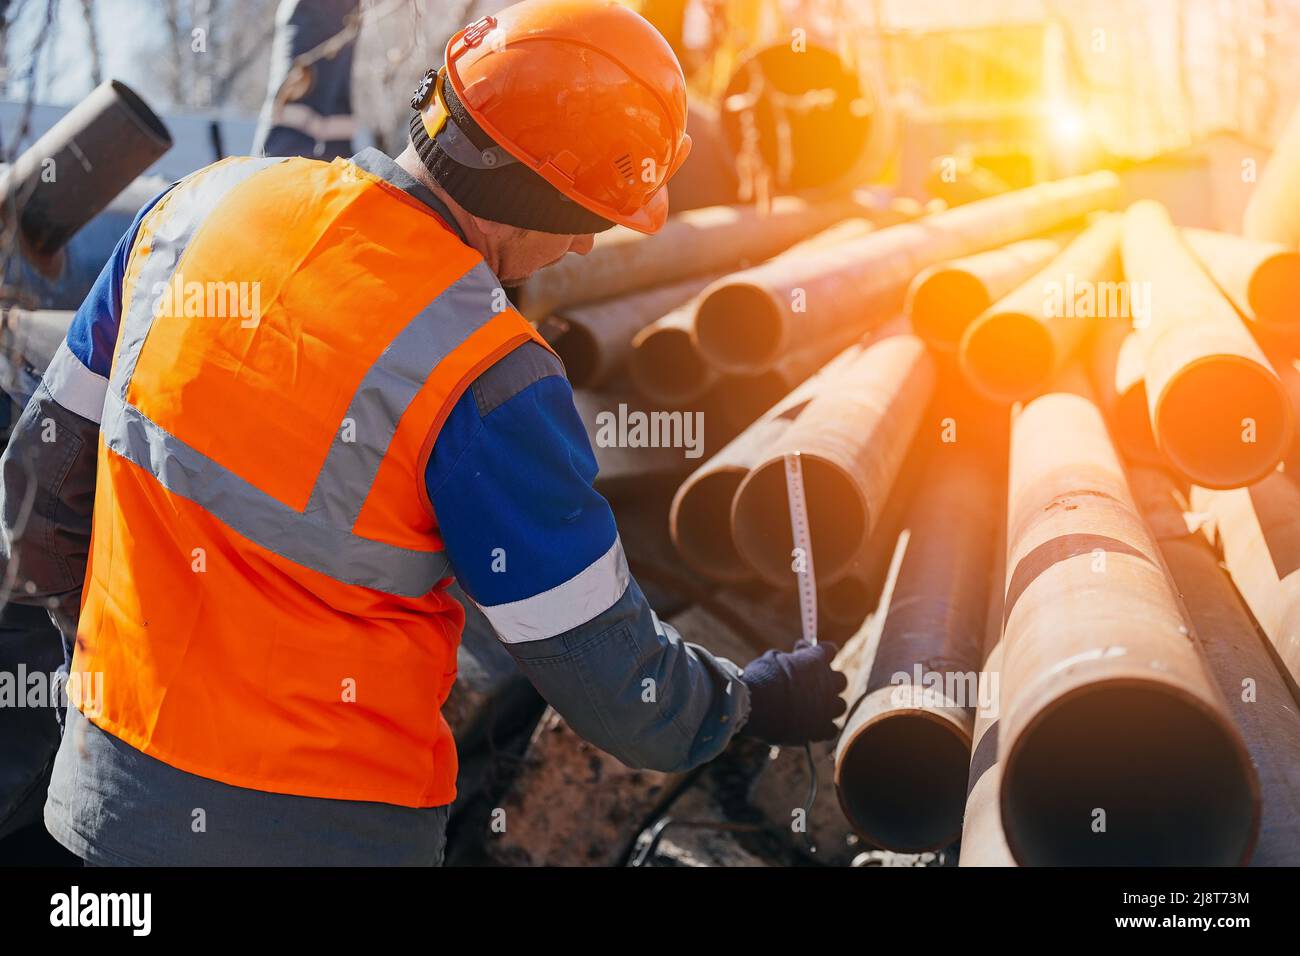 Builder in helmet and vest measures diameter of pipe. Workflow. Open warehouse with metal pipes. sun glare, Stock Photo